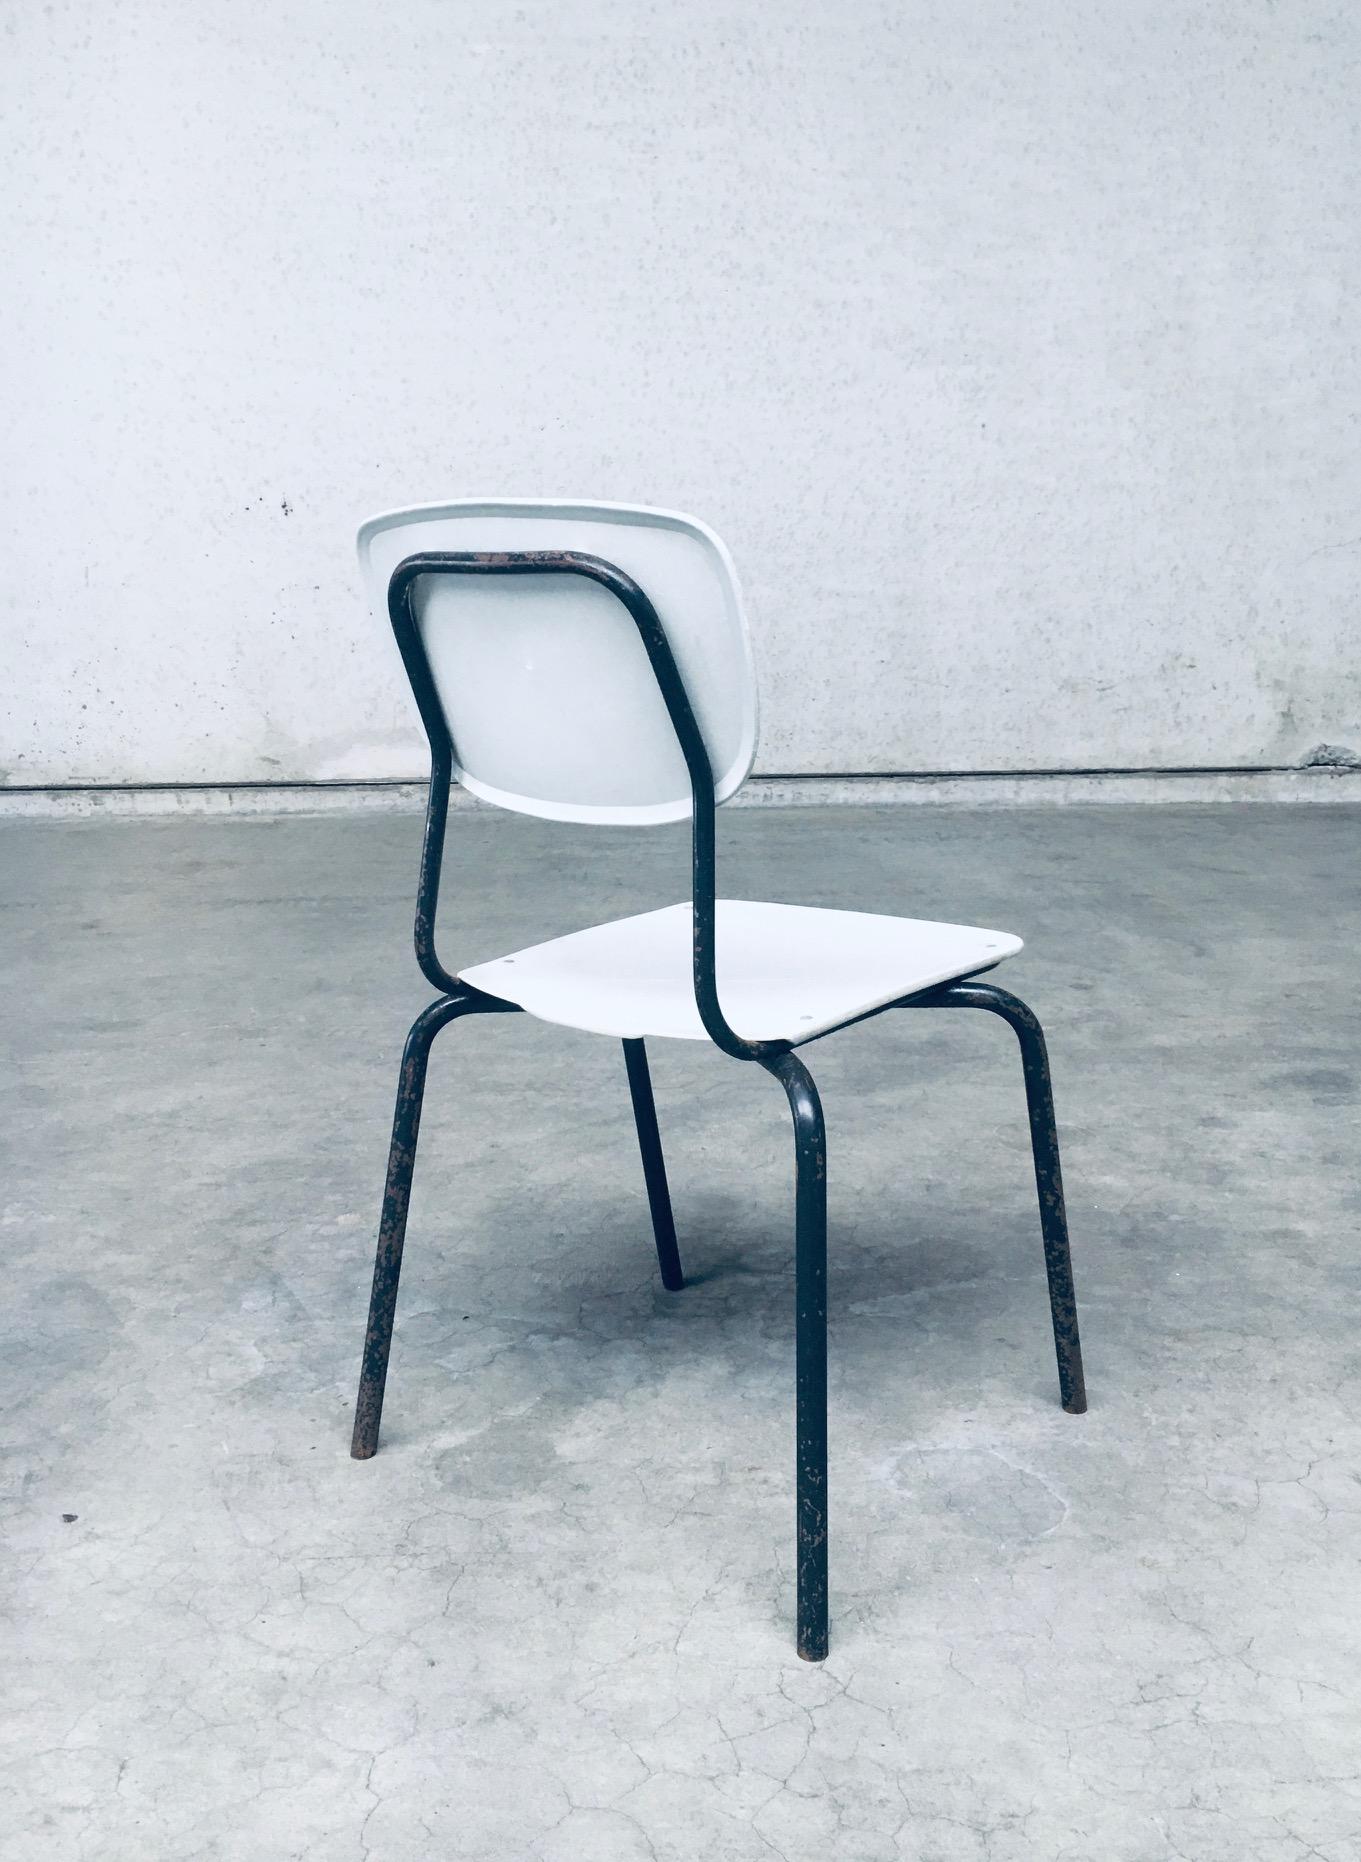 1960's Dutch Industrial Design Stacking Chairs For Sale 5